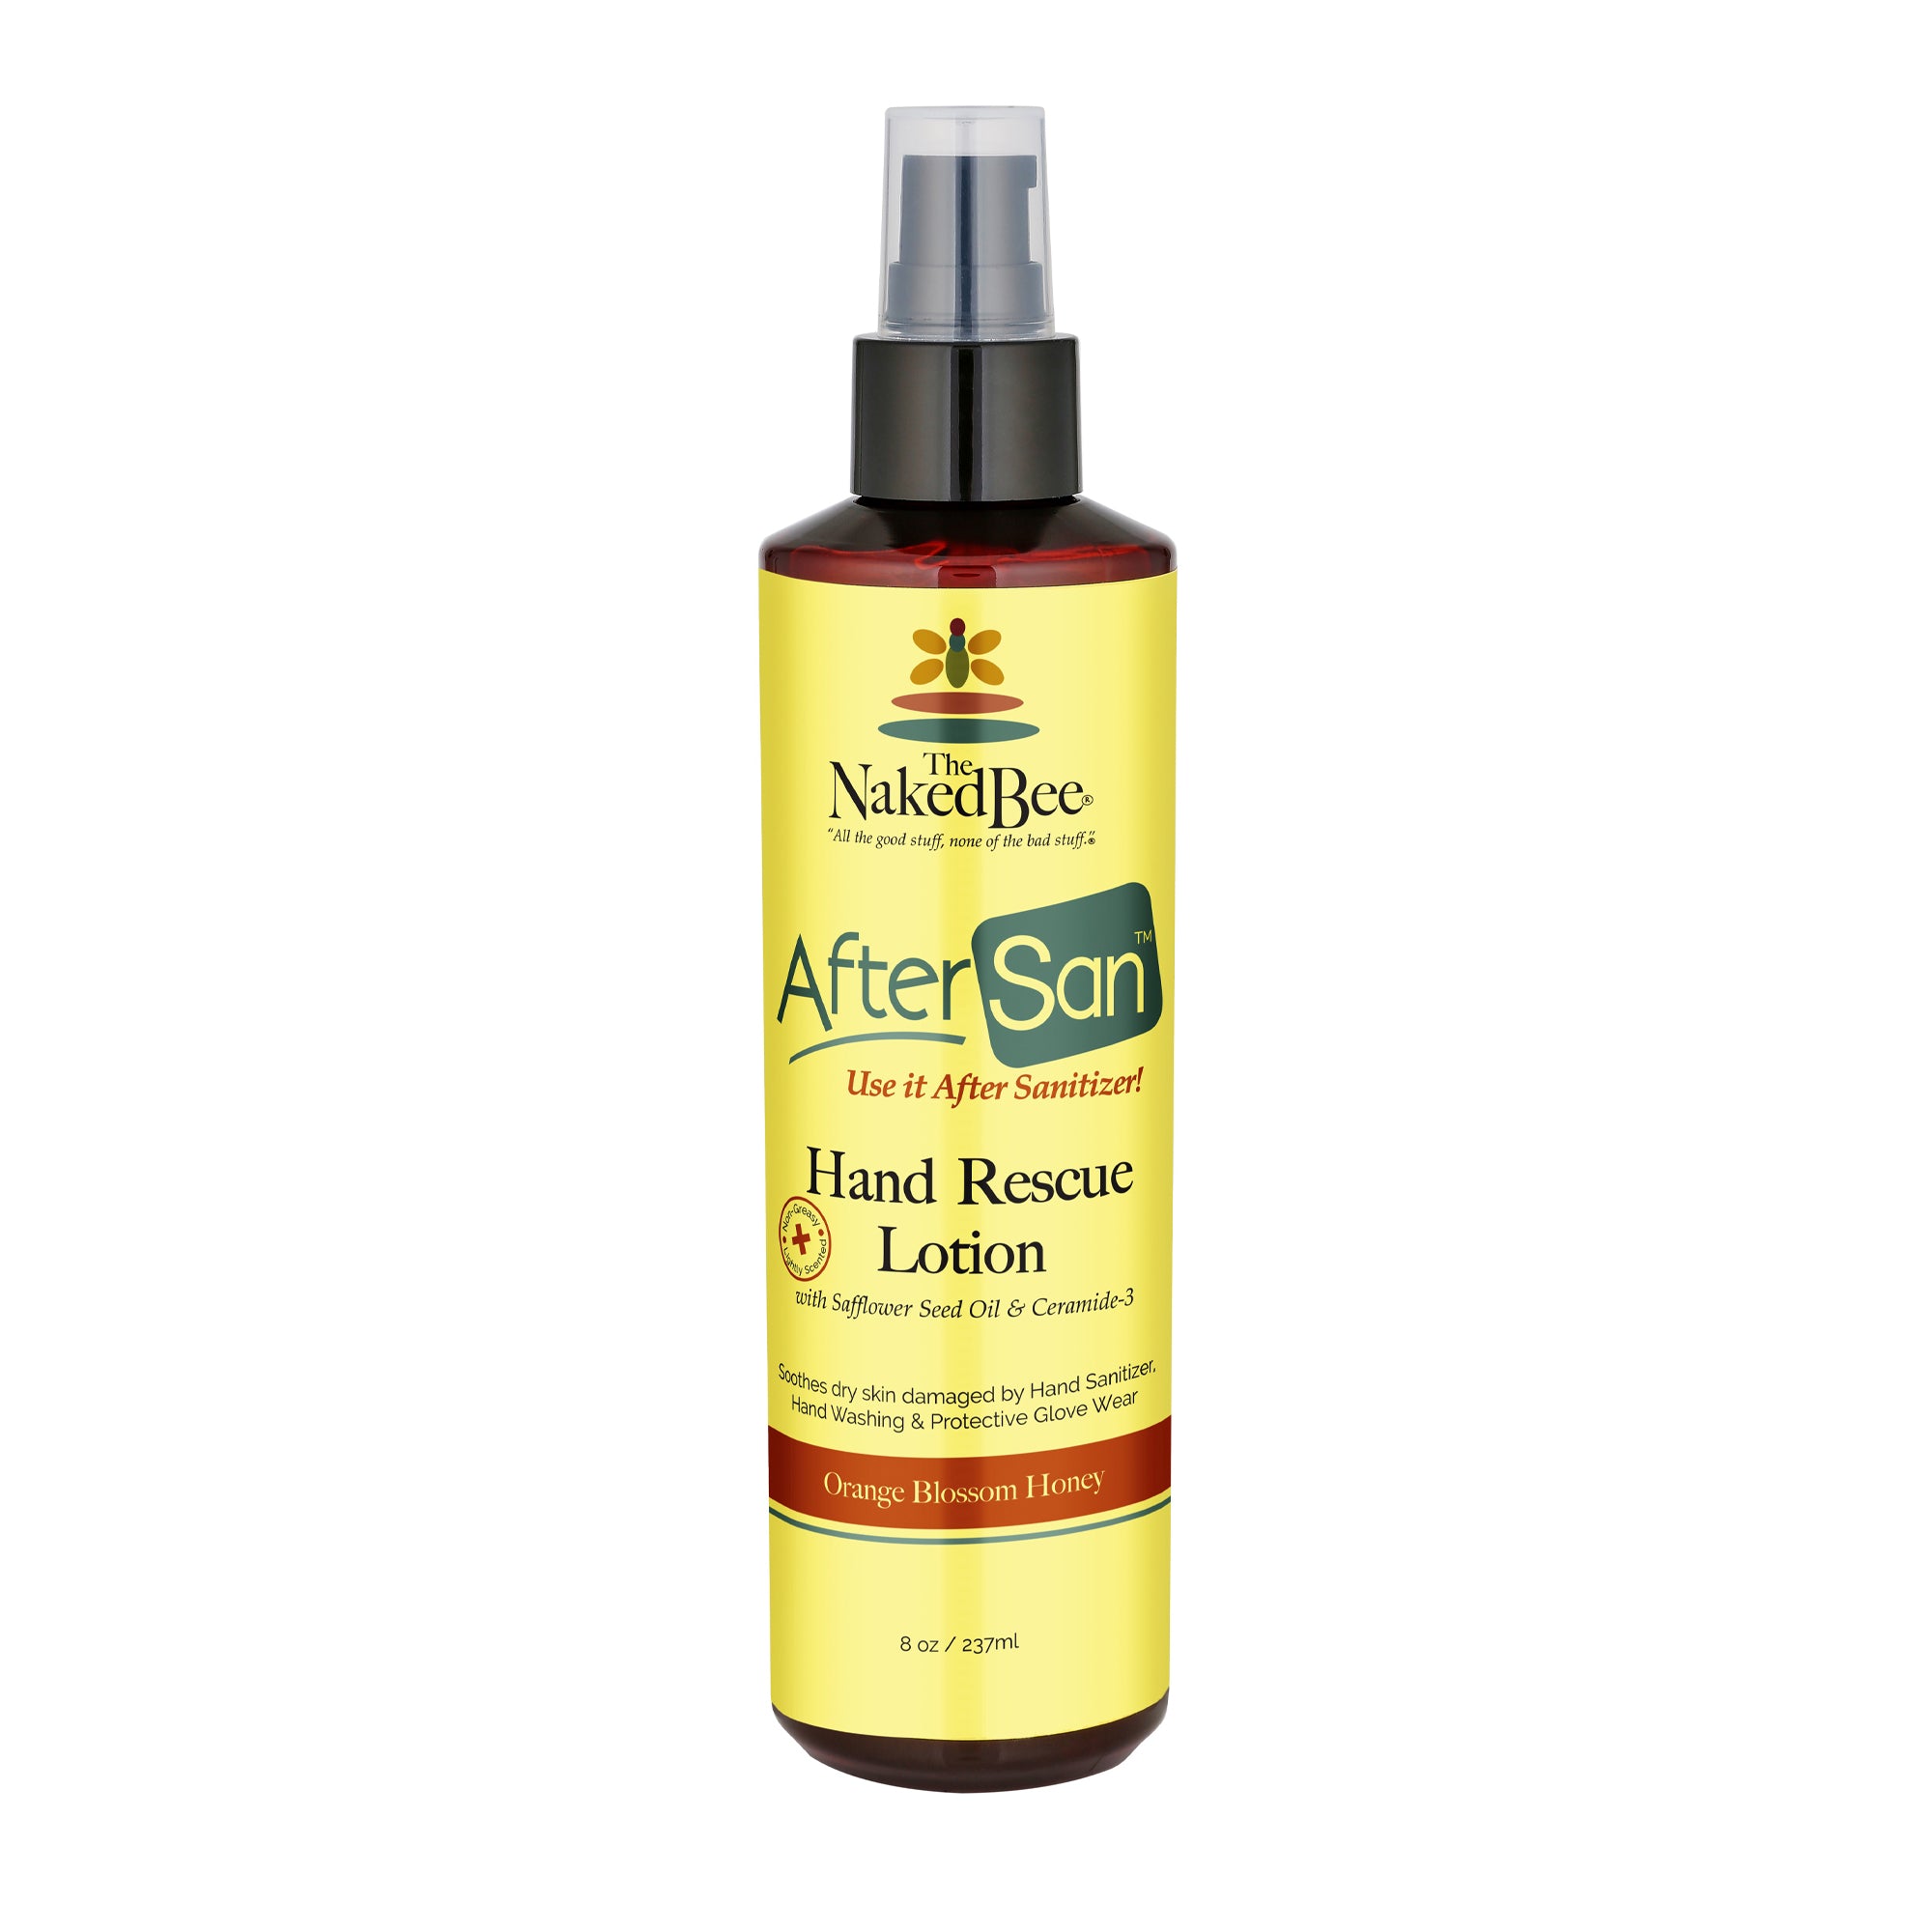 The Naked Bee Honey AfterSan Hand Rescue 8oz - Orange Blossom